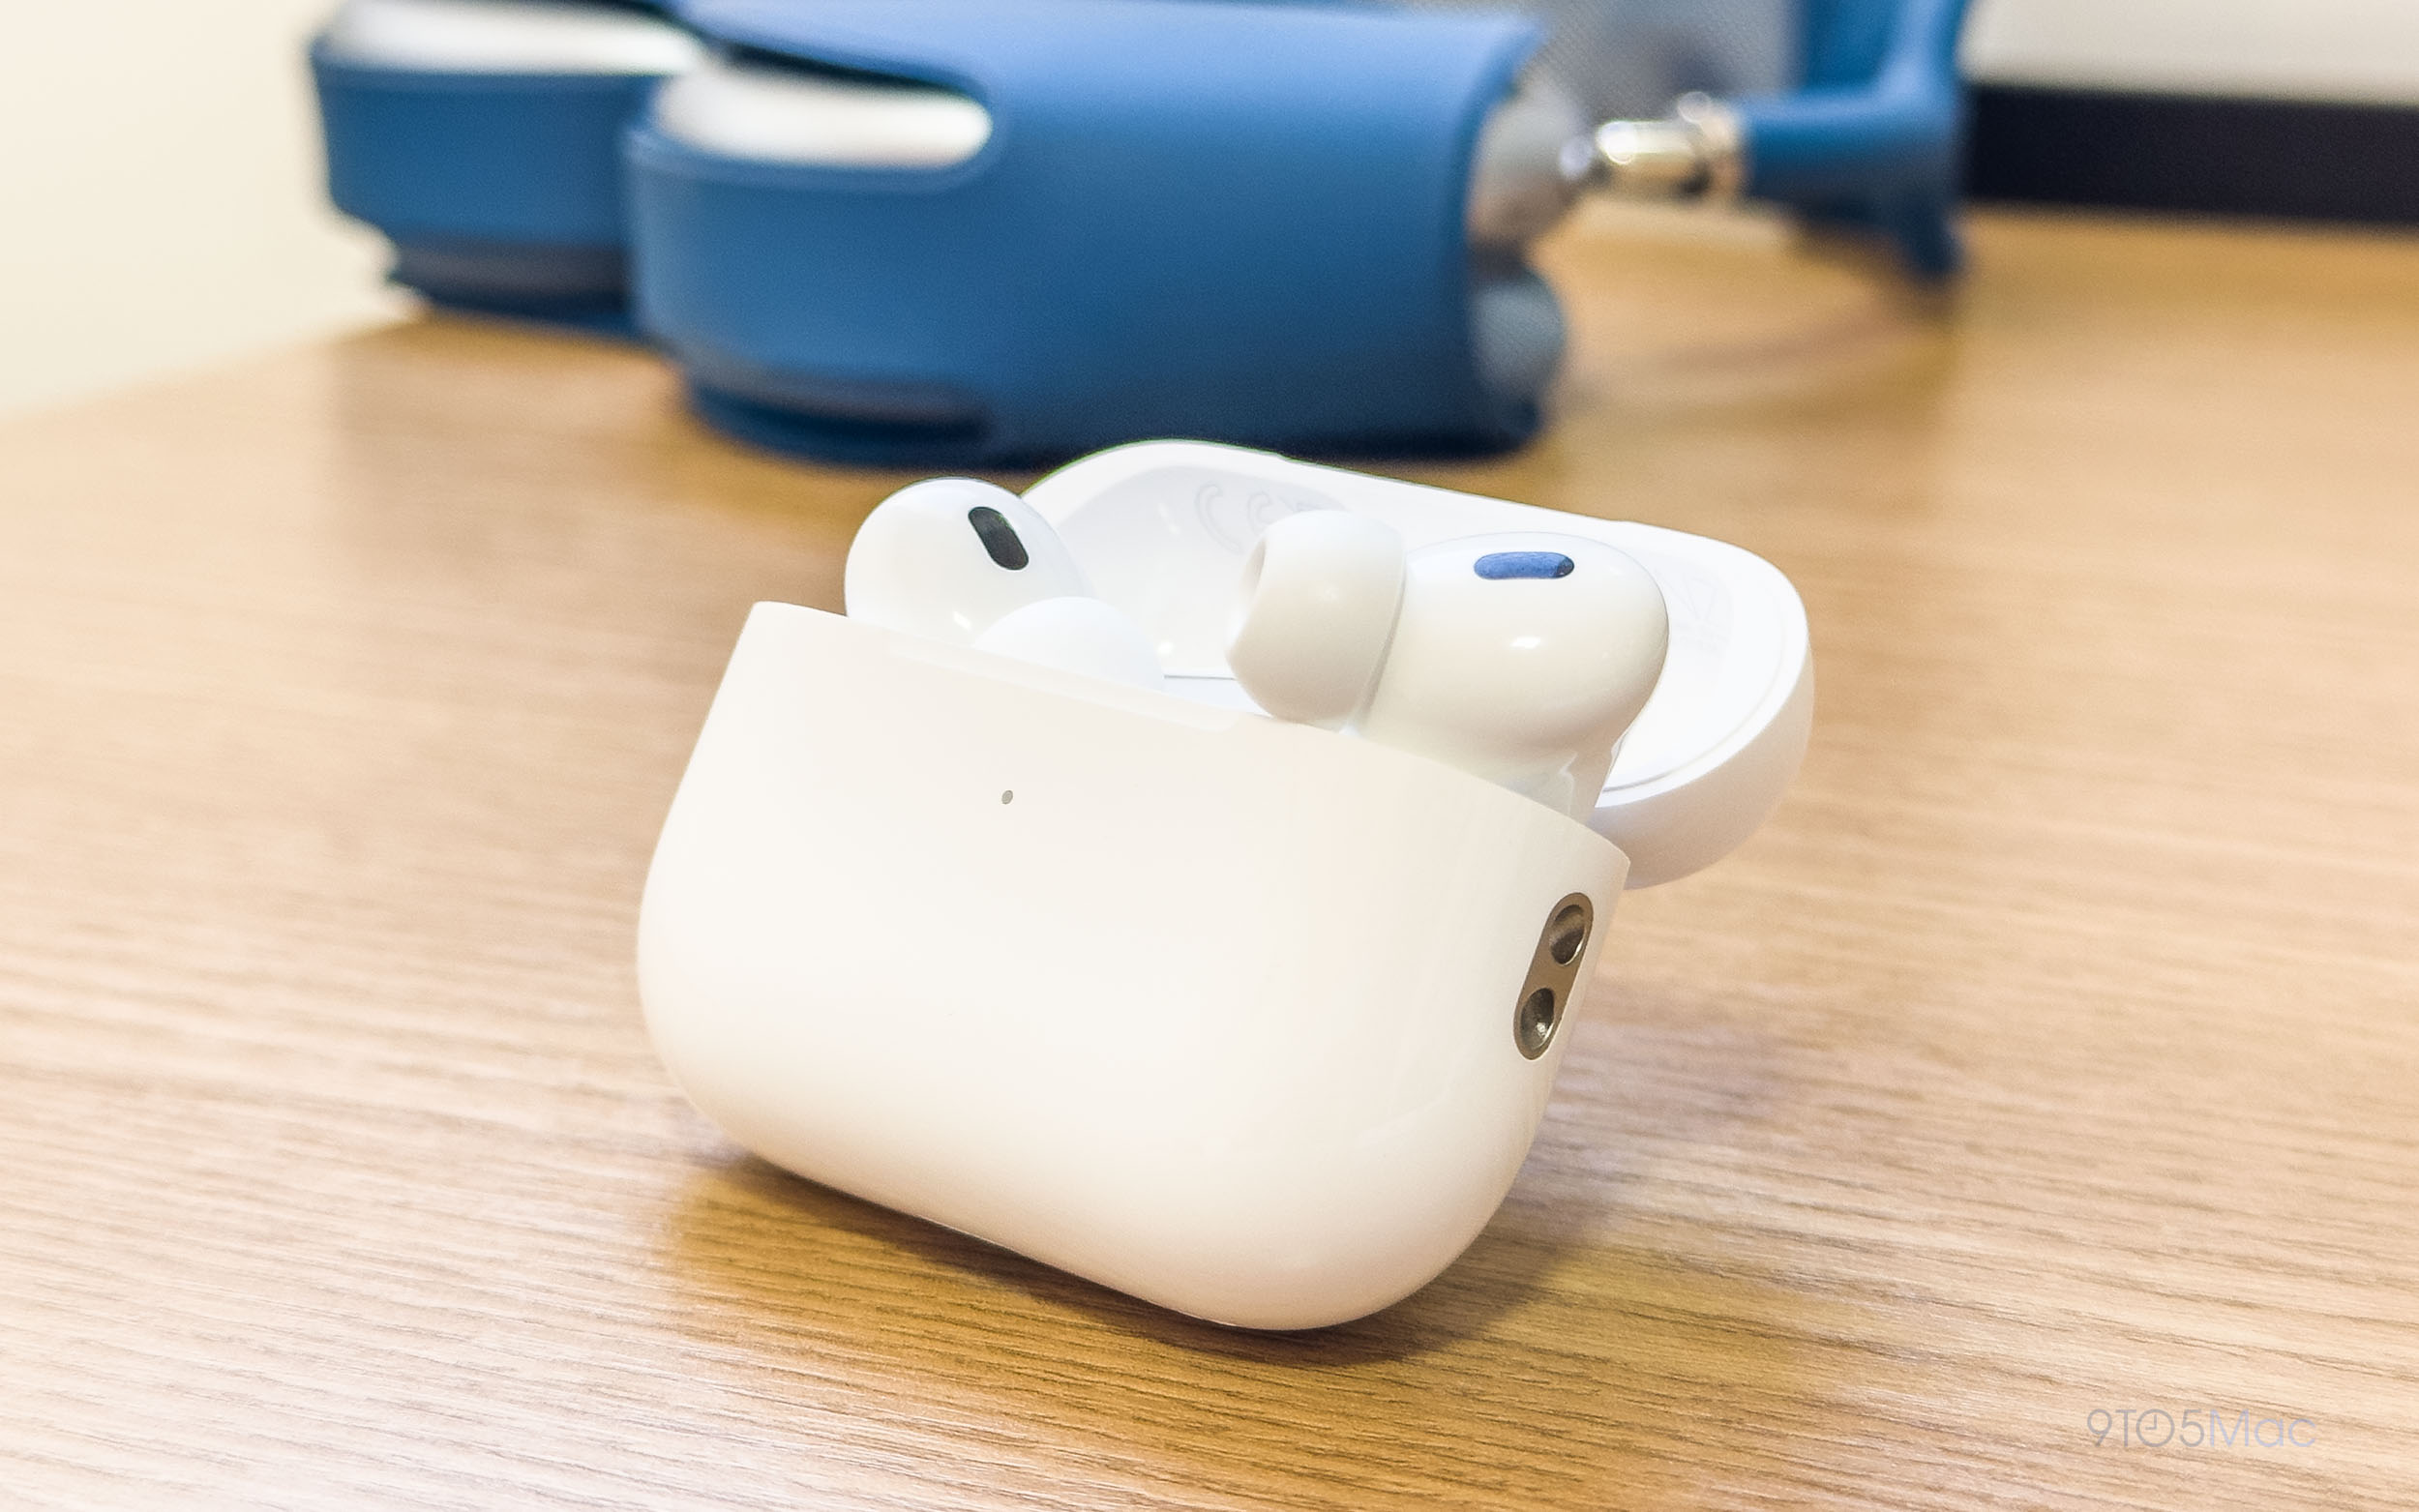 AirPods Pro 2 prove dominant as sales surge, AirPods 3 shipments lag